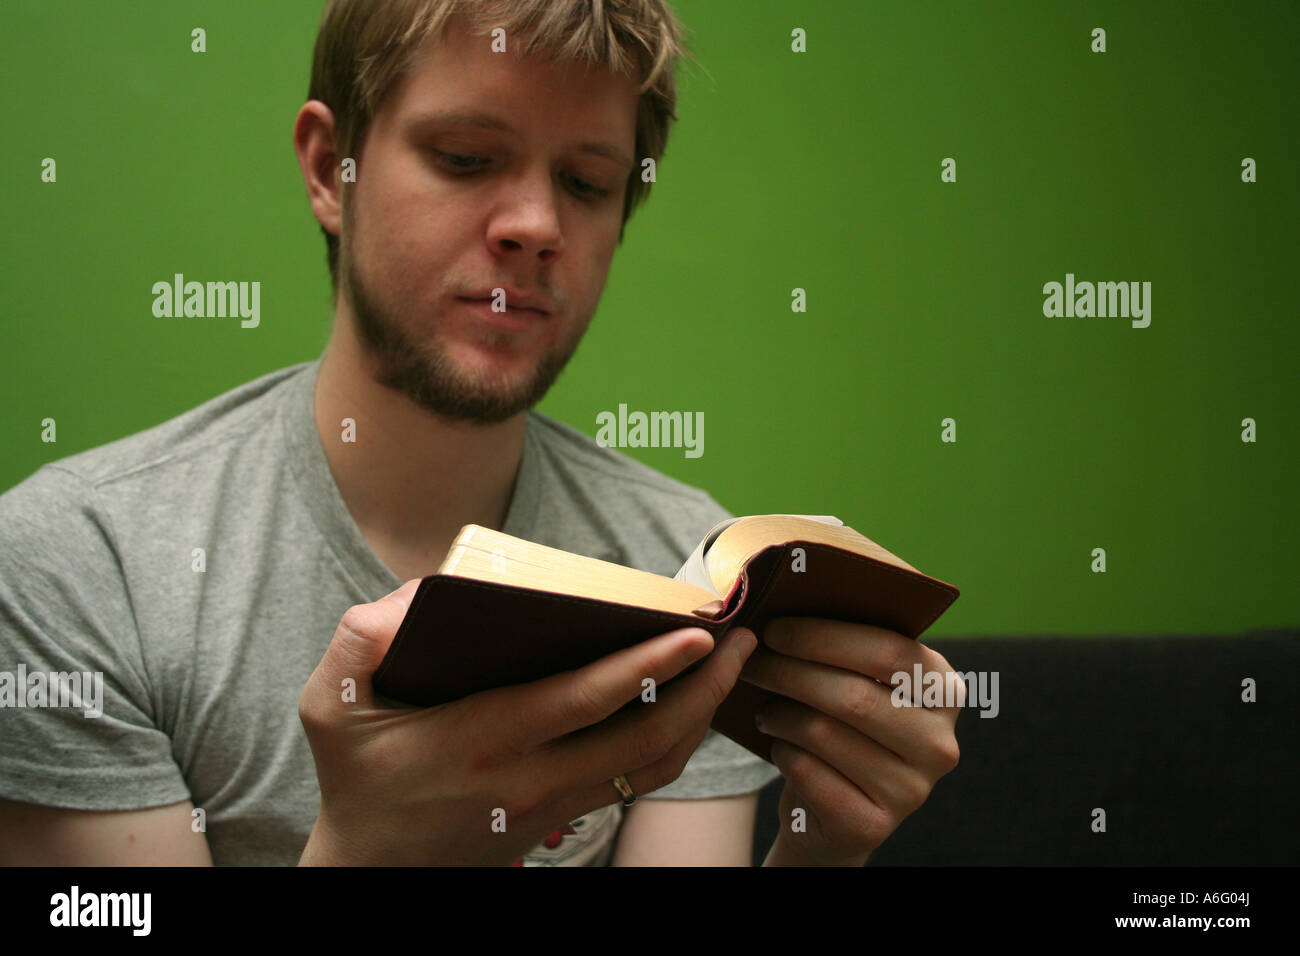 Young blond man reading the Bible with bright green background Stock Photo